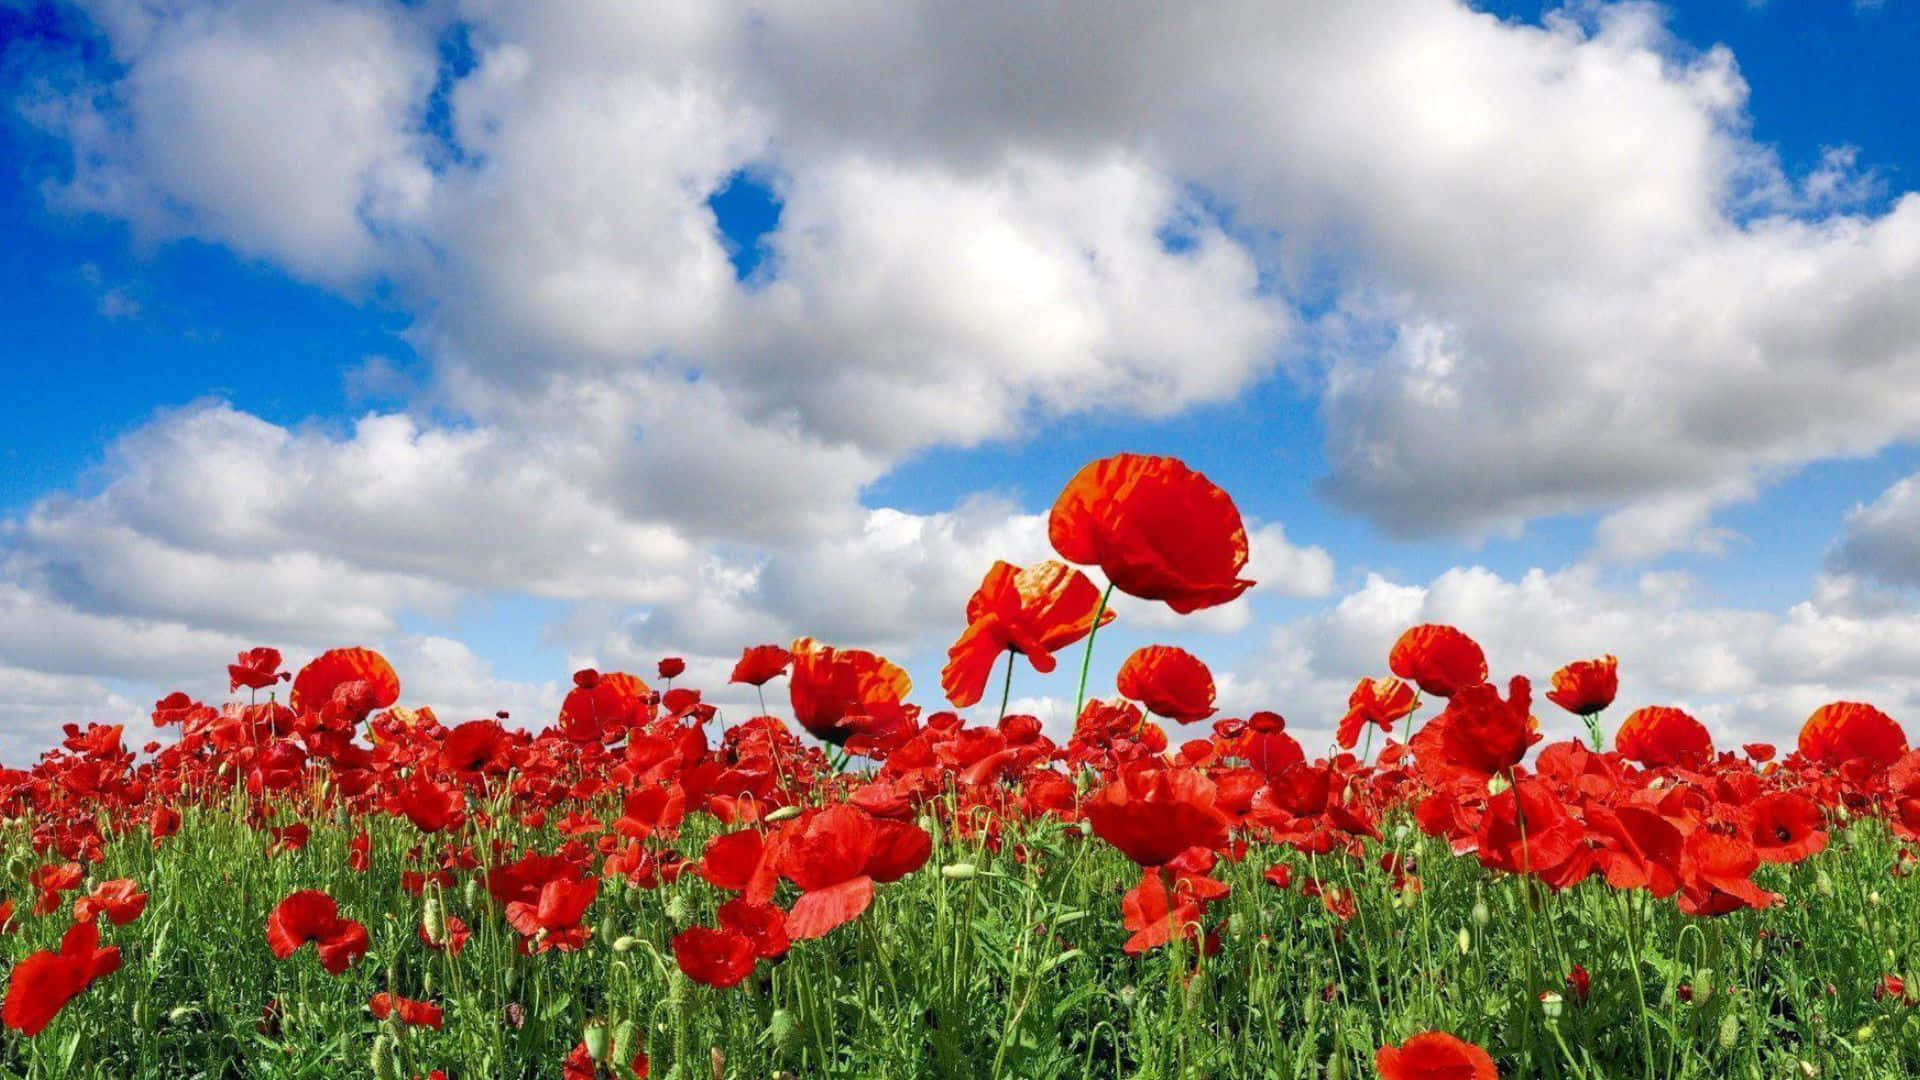 Vibrant_ Red_ Poppies_ Field Wallpaper